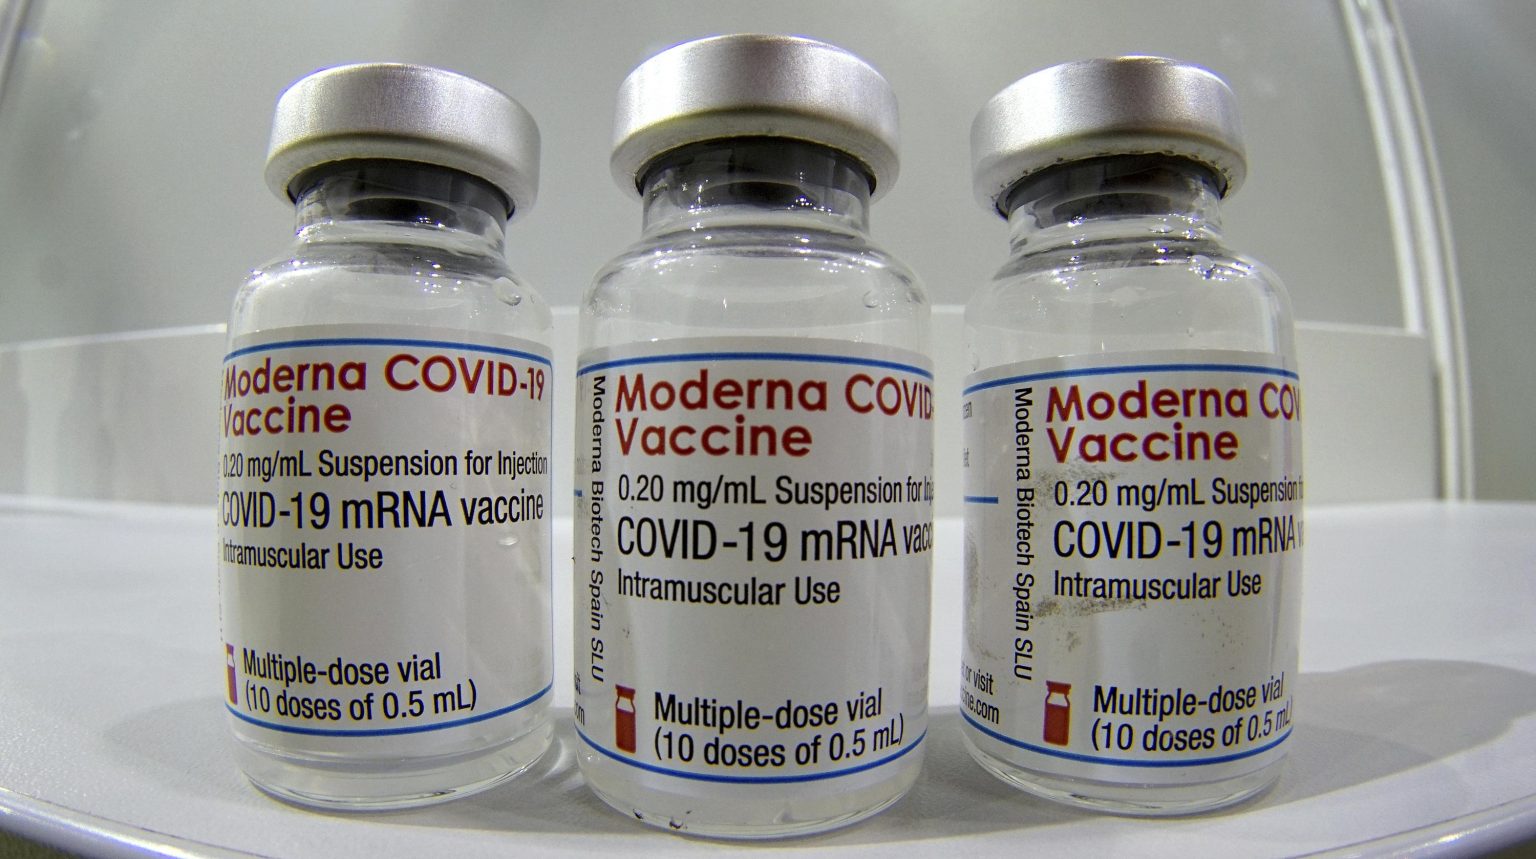 Moderna says updated booster appears effective against Omicron subvariants